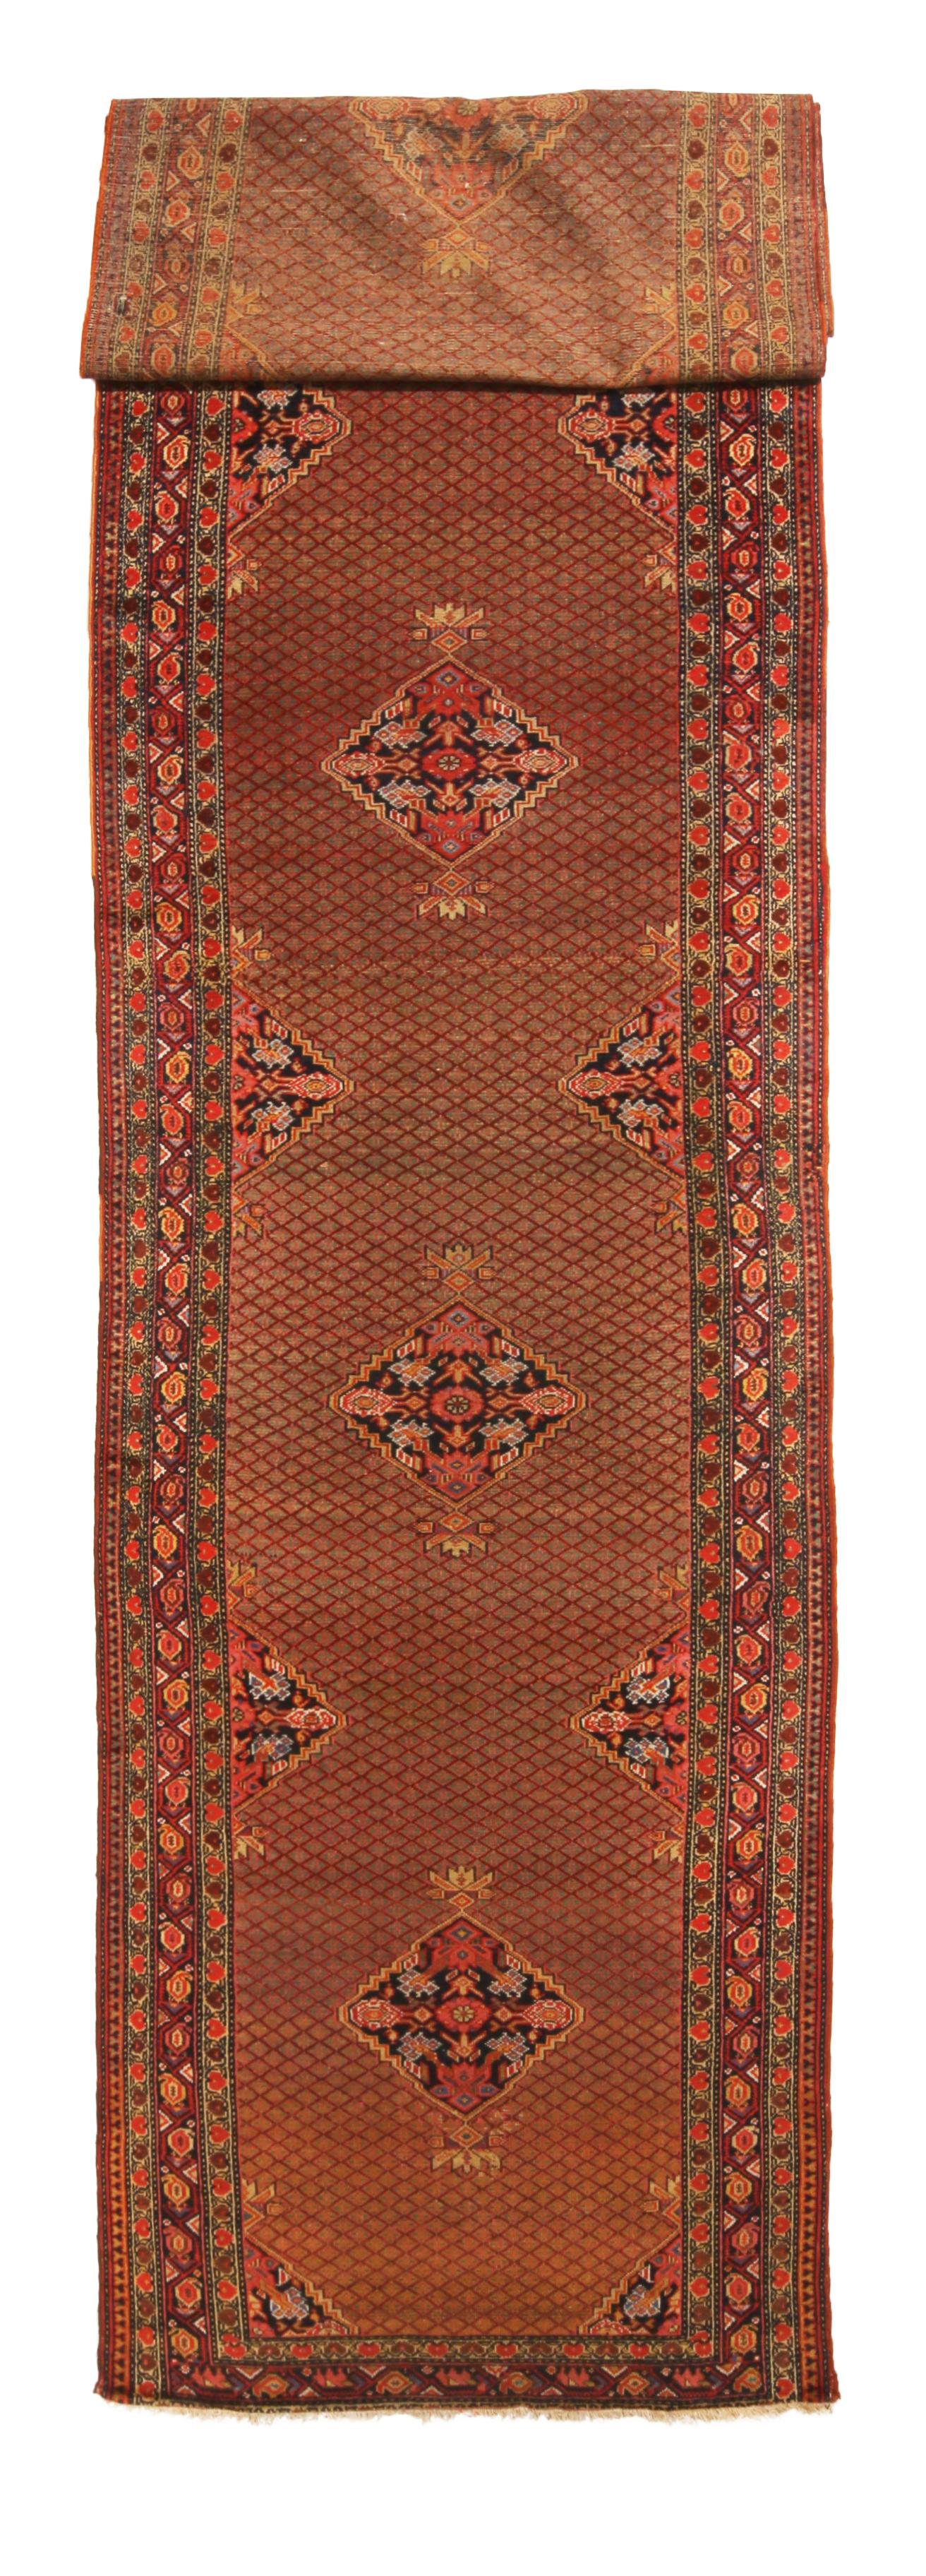 Hand-Knotted Antique Sarab Rug in Red Geometric Floral Pattern Persian Runner by Rug & Kilim For Sale